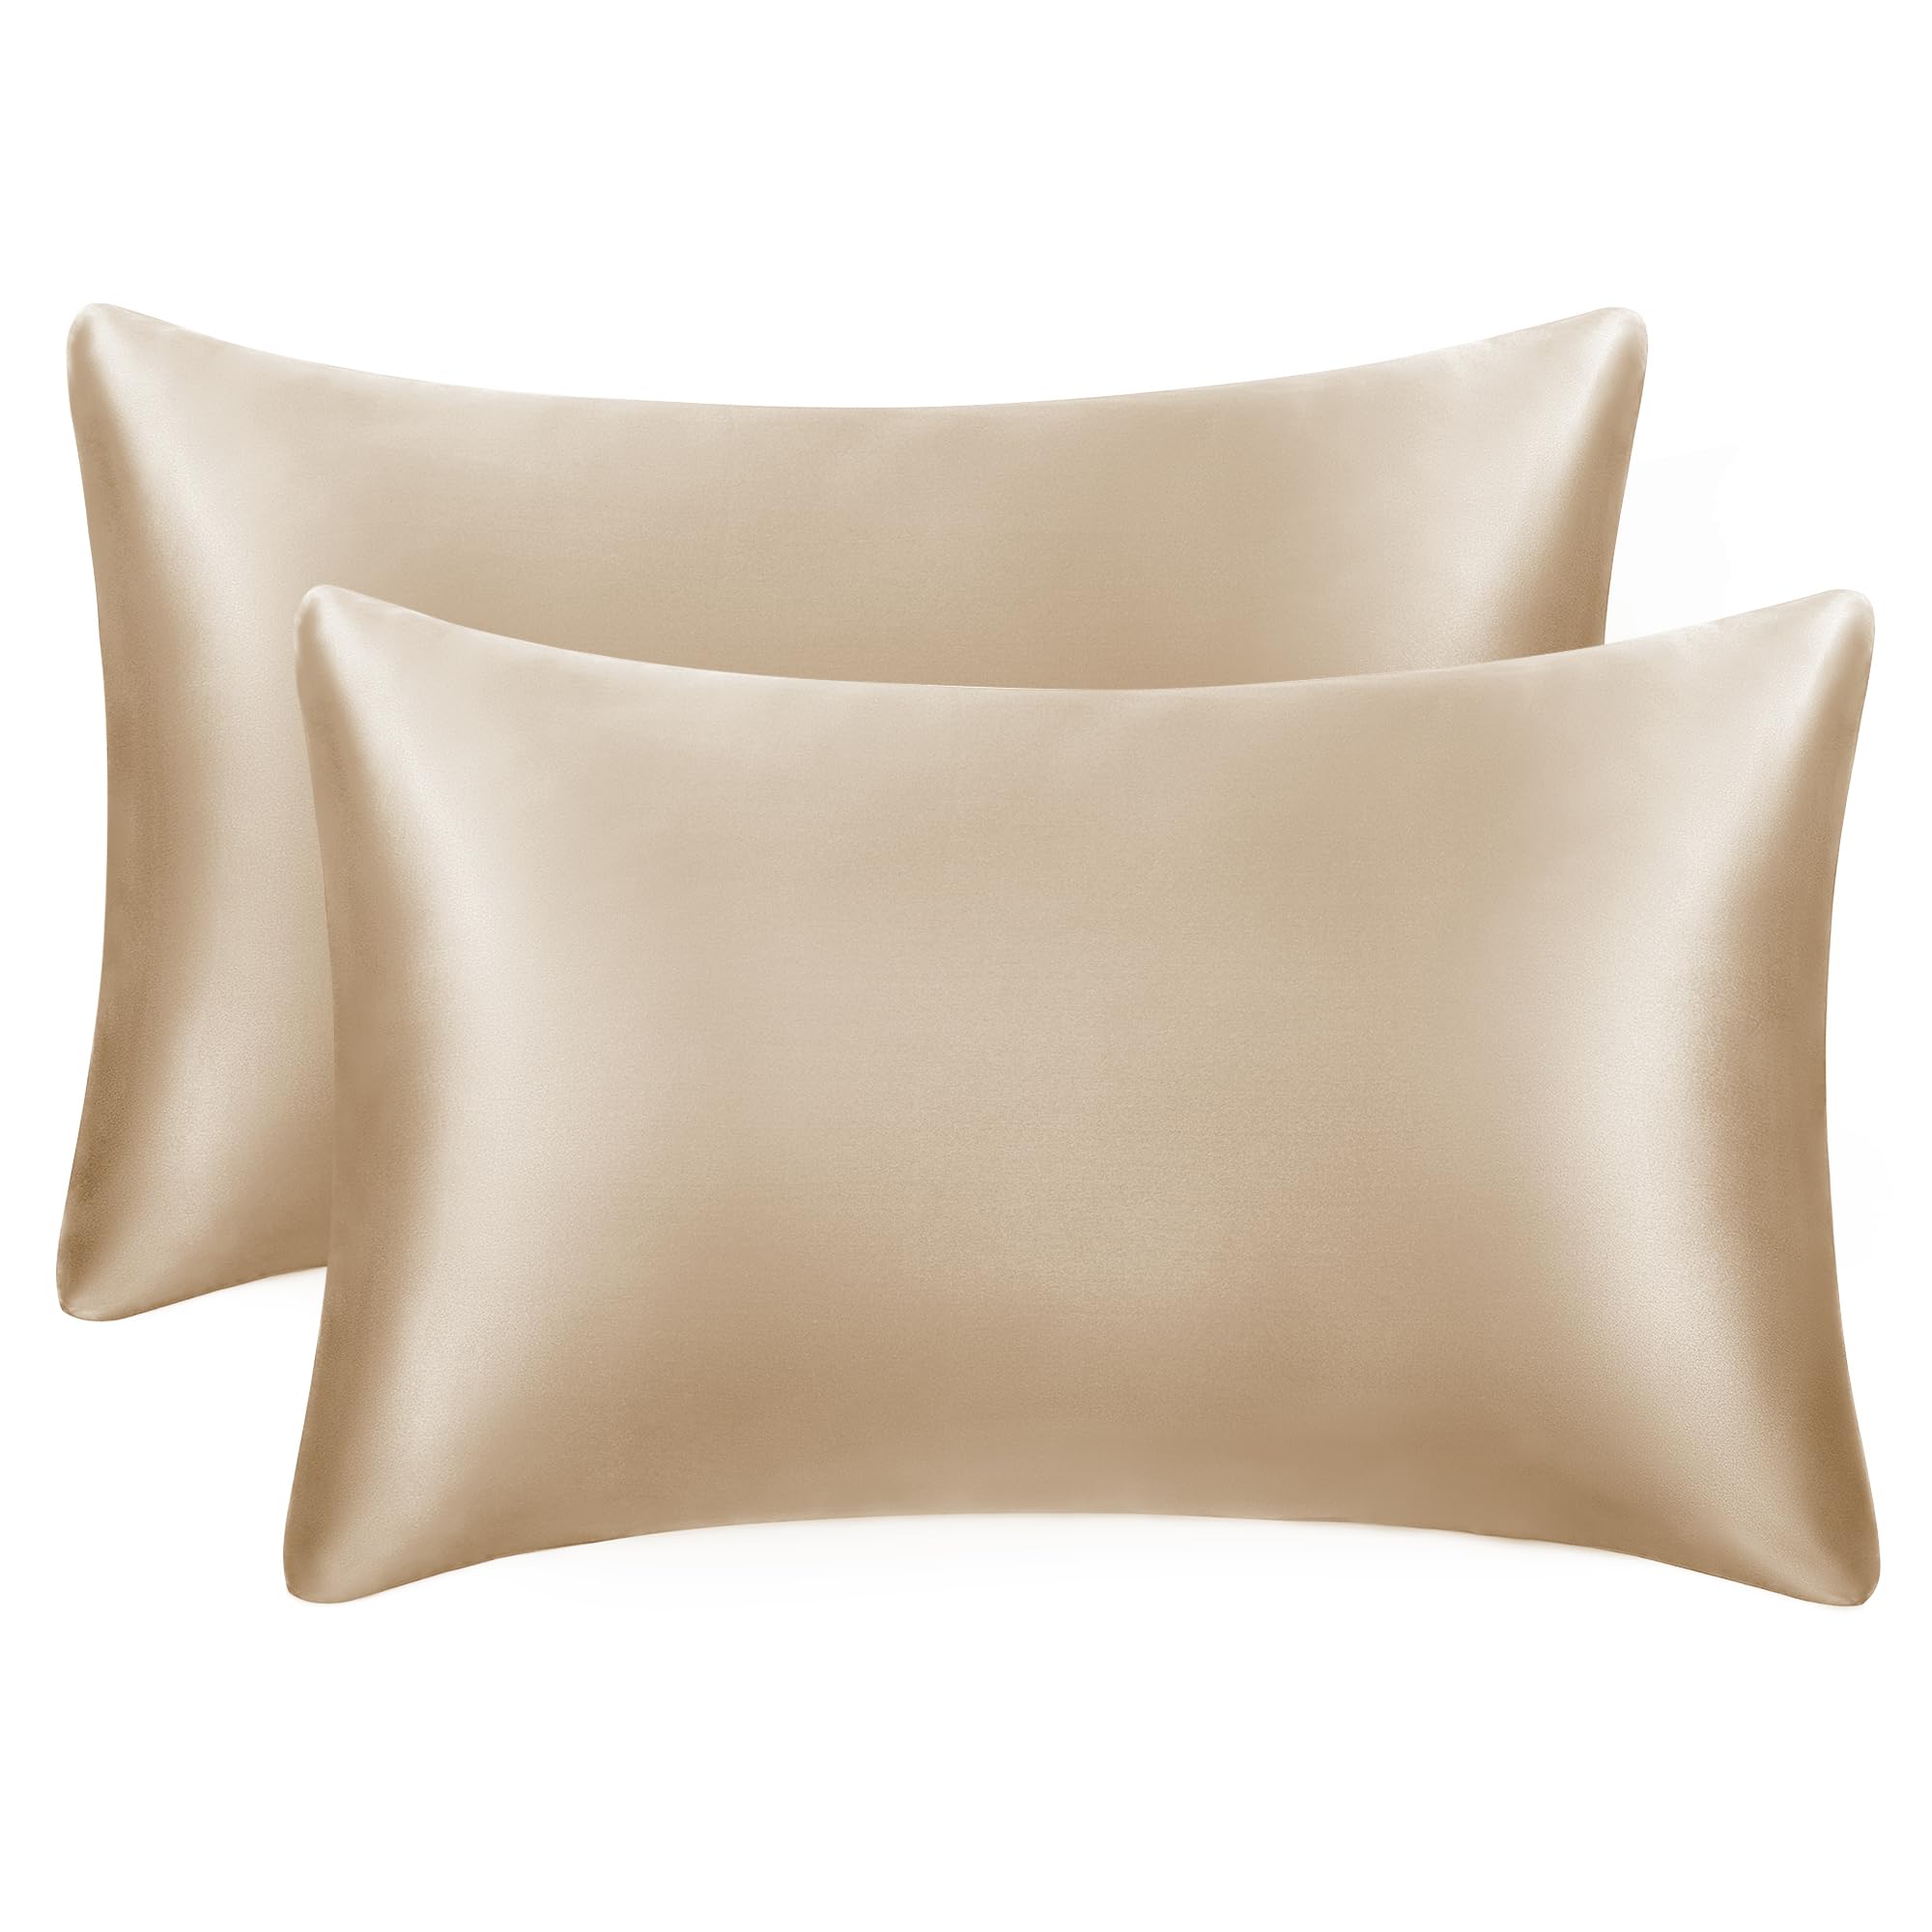 EXQ Home Silky Satin Pillowcase for Hair and Skin,Pillow cases Standard Size Set of 2 Satin Pillow case 2 Pack with Envelope clo